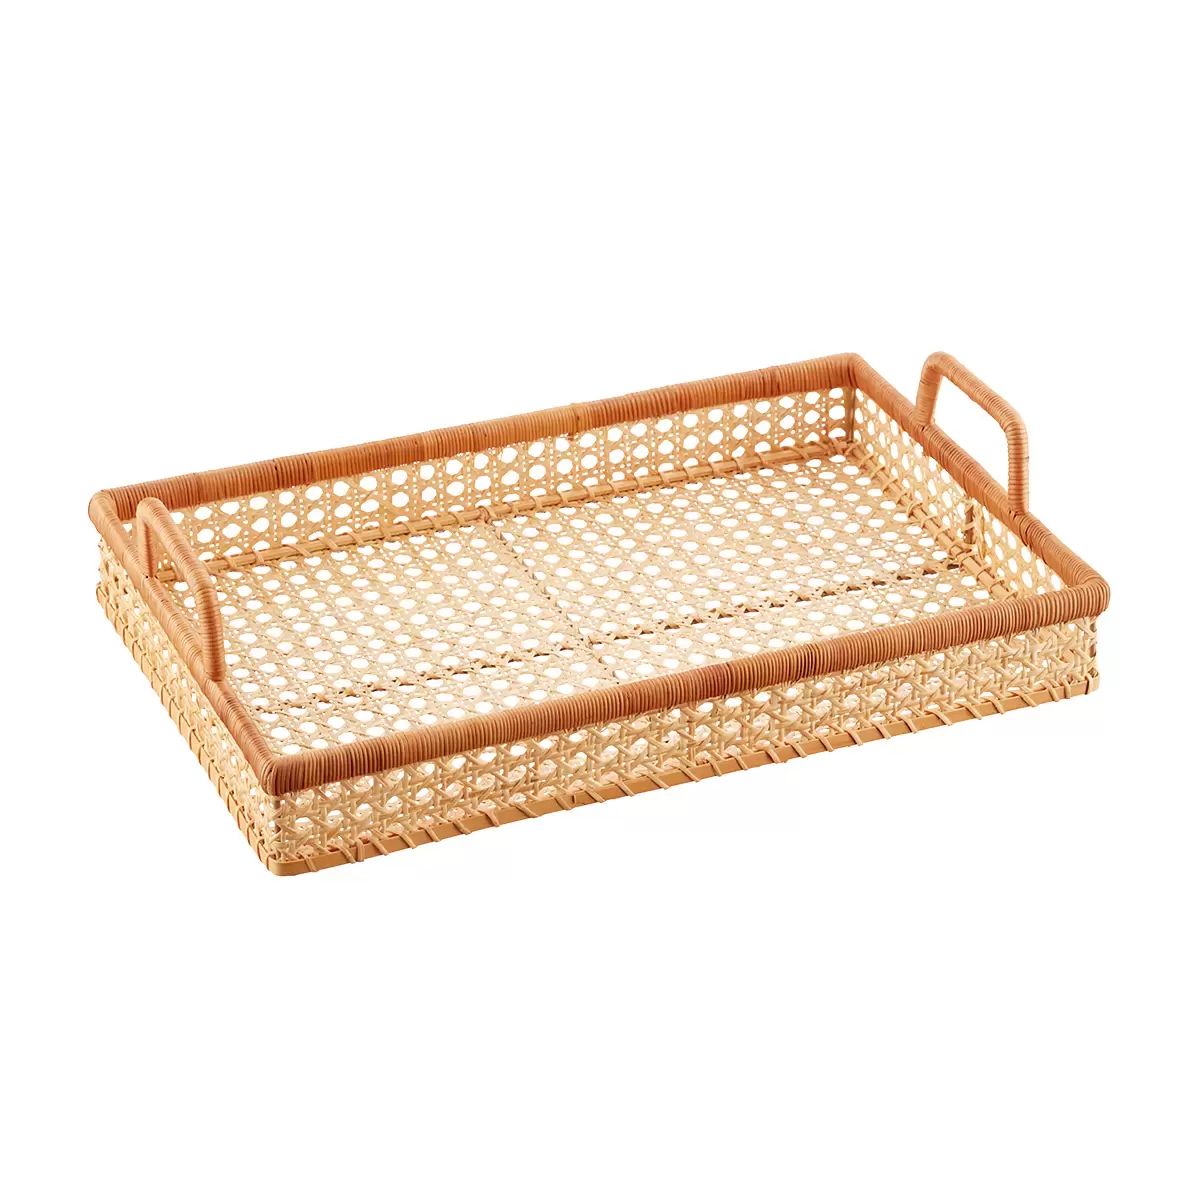 Albany Cane Rattan Trays | The Container Store